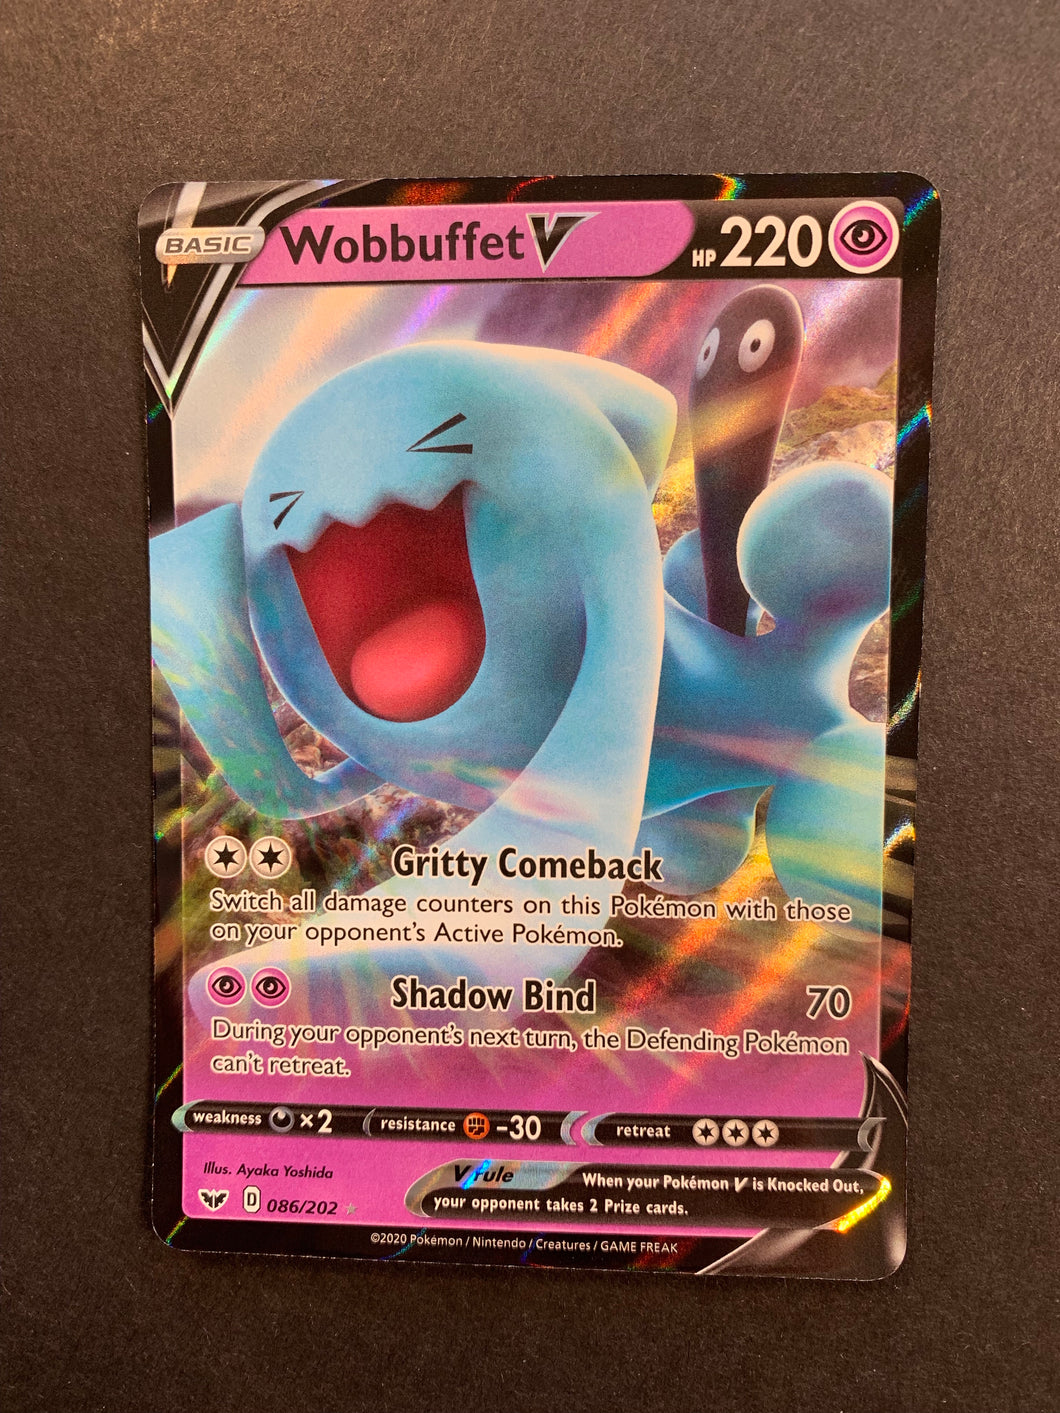 Authentic Mint Pokemon Tcg Cardwobbuffet V Ultra Rare Sword Shield 86 Collectible Card Games Maisonconsulting Pokemon Trading Card Game